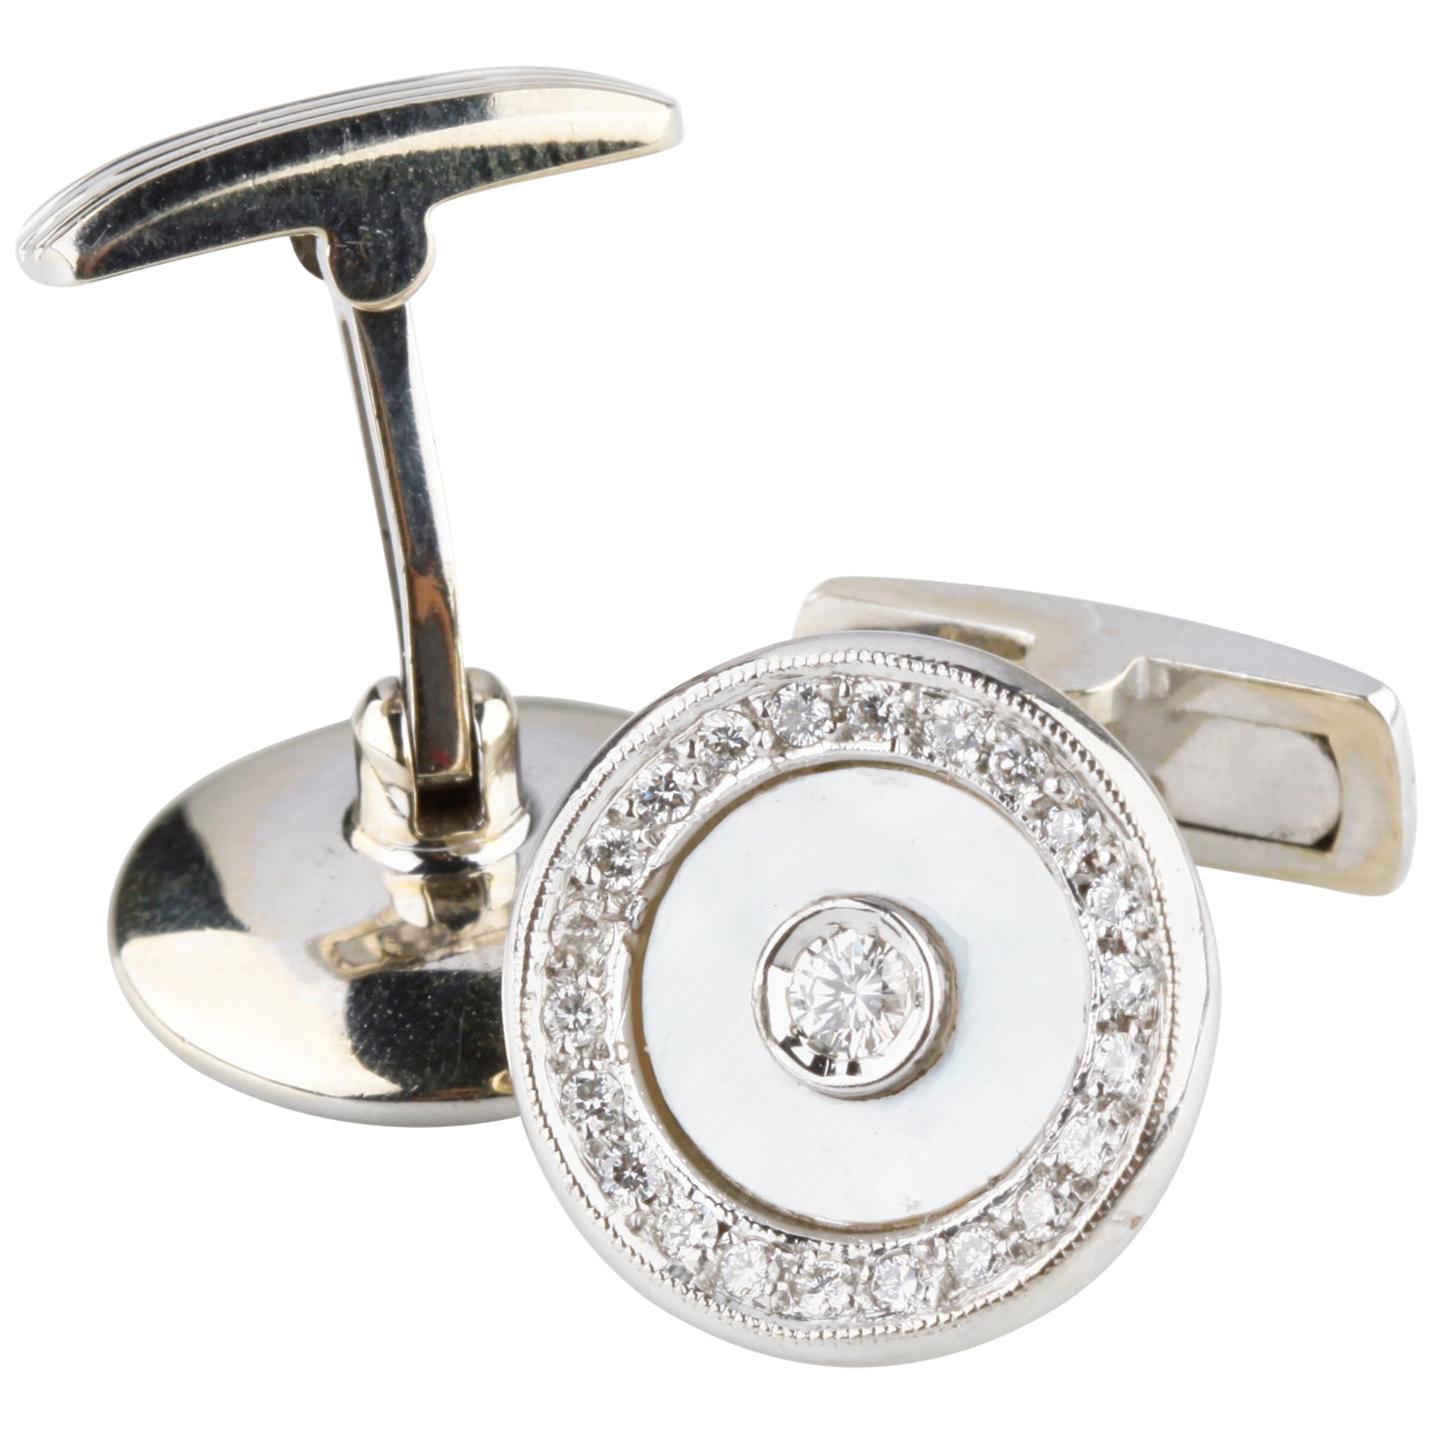 0.70 Carat Diamond and Mother of Pearl Inlay Cufflinks in White Gold